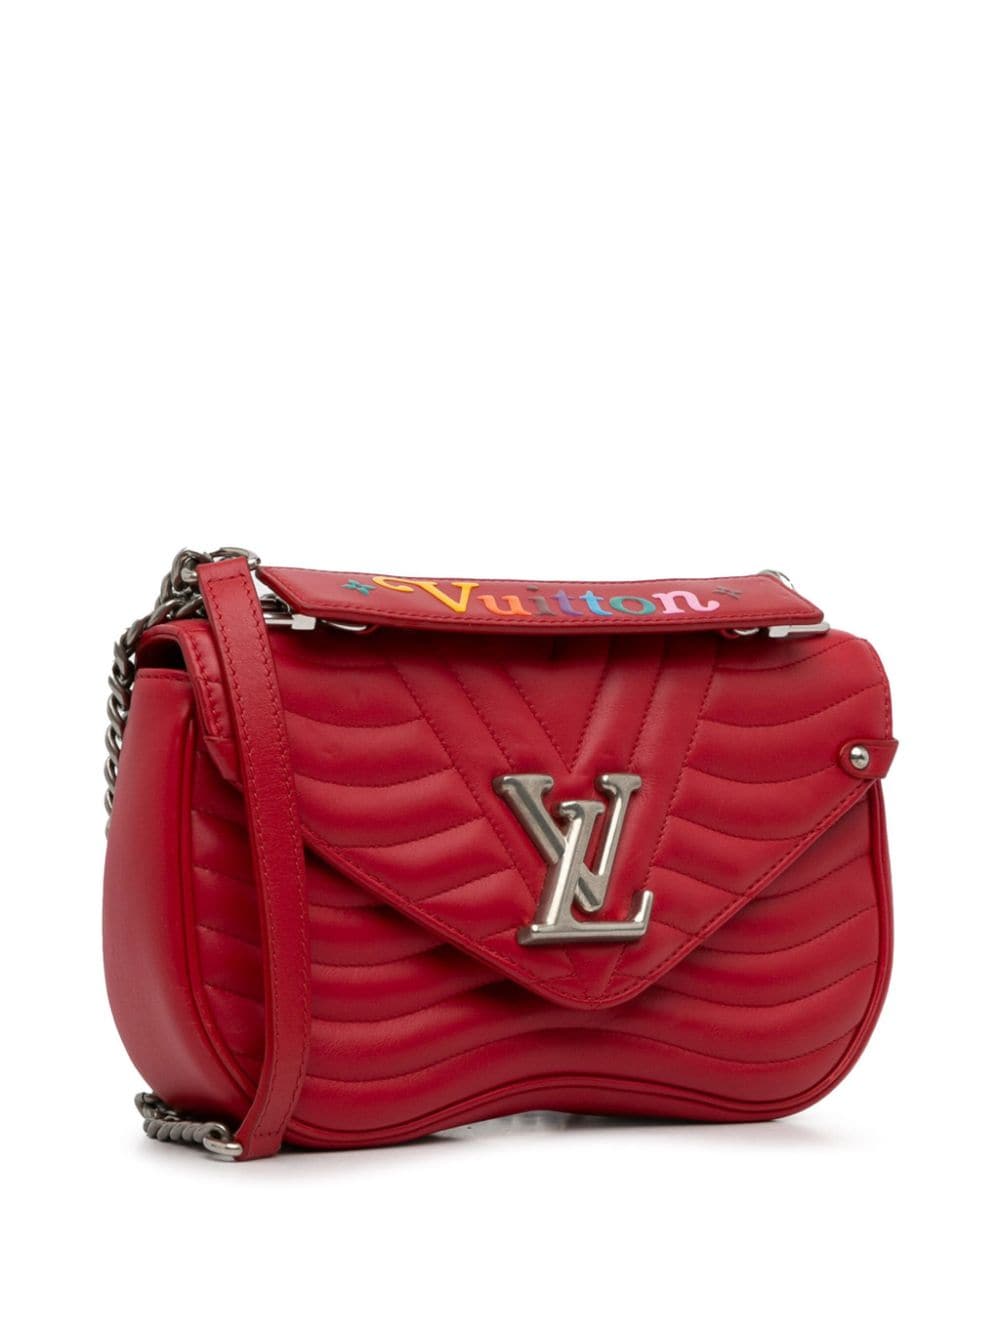 Pre-owned Louis Vuitton 2018 New Wave Chain Bag Mm Satchel In Red